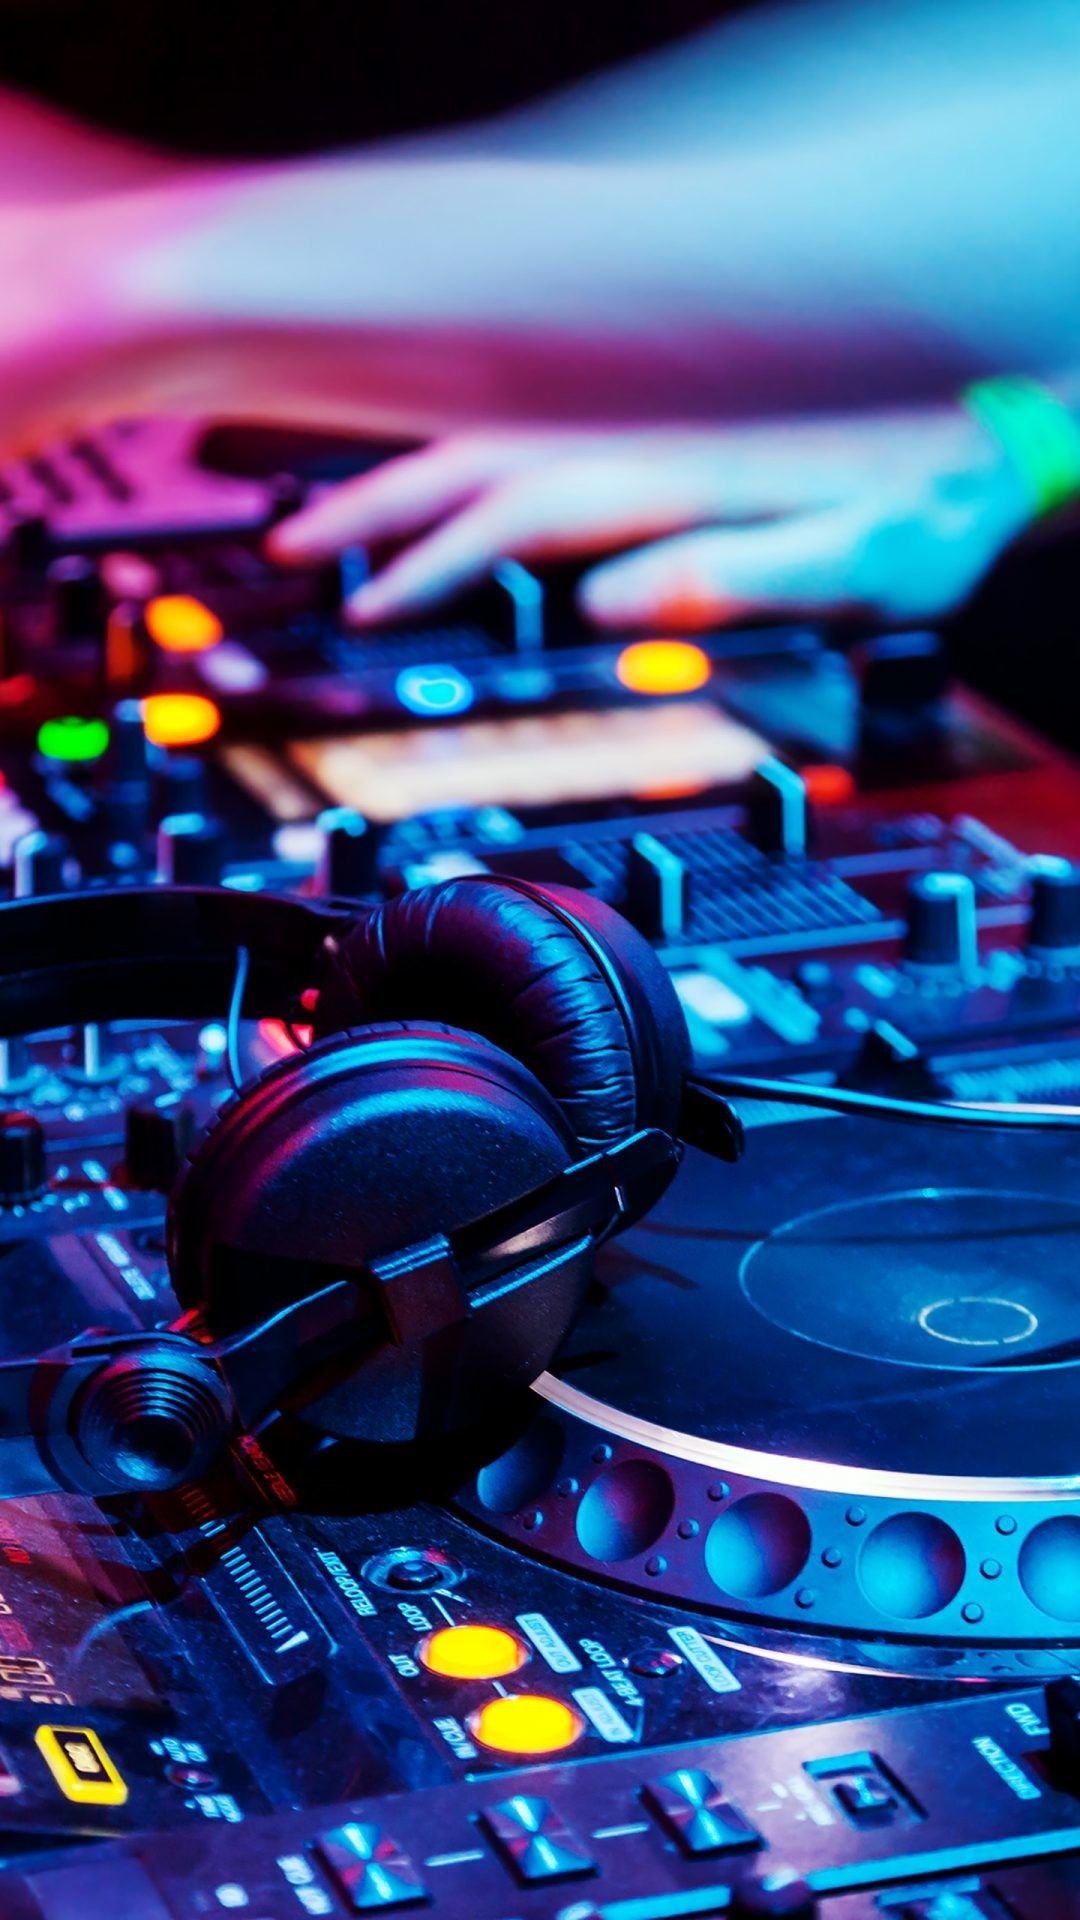 dj mixer 1080P 2k 4k HD wallpapers backgrounds free download  Rare  Gallery